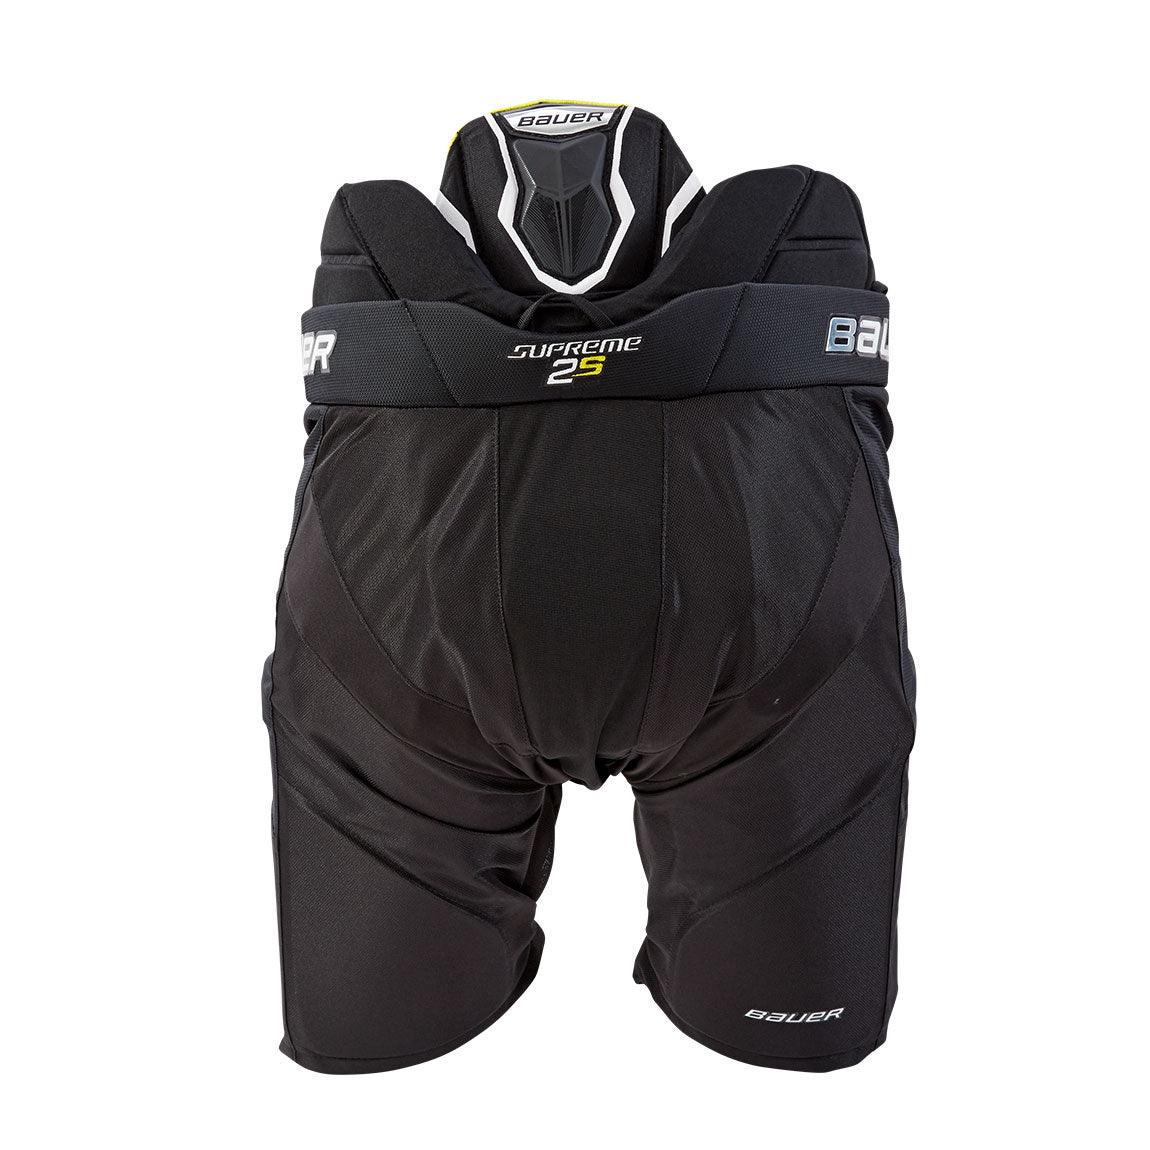 Supreme 2S Hockey Pants - Junior - Sports Excellence